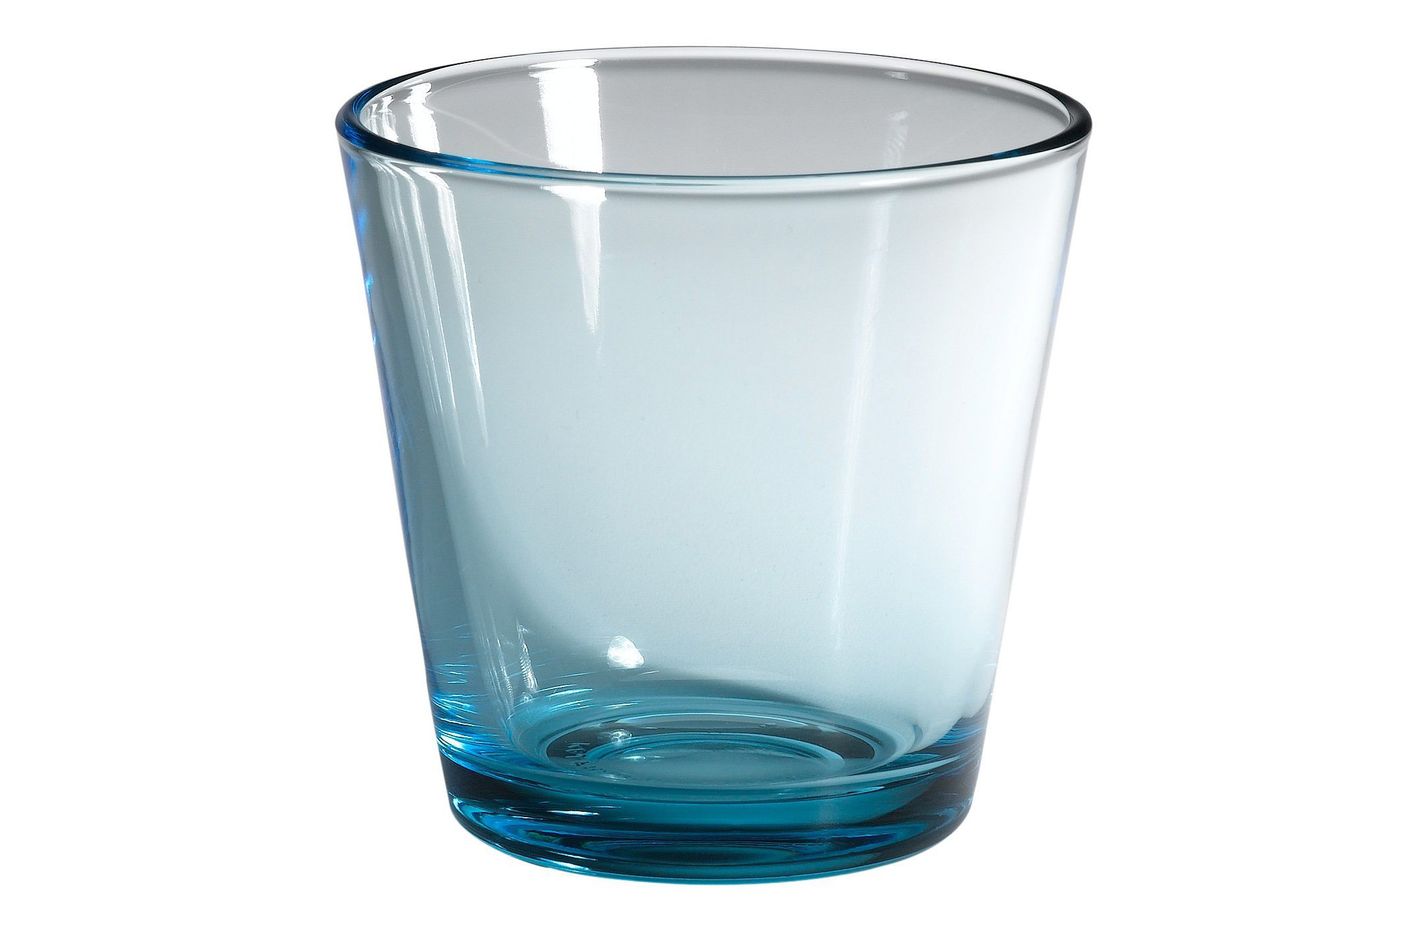 What are some good quality drinking tumblers?